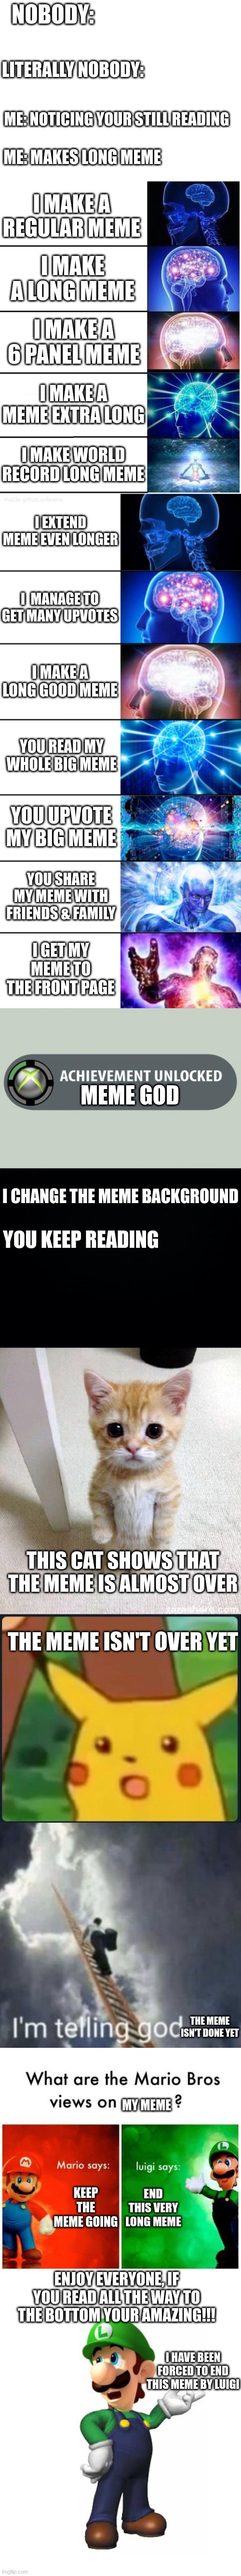 NOBODY:; LITERALLY NOBODY:; ME: NOTICING YOUR STILL READING; ME: MAKES LONG MEME; I MAKE A REGULAR MEME; I MAKE A LONG MEME; I MAKE A 6 PANEL MEME; I MAKE A MEME EXTRA LONG; I MAKE WORLD RECORD LONG MEME; I EXTEND MEME EVEN LONGER; I  MANAGE TO GET MANY UPVOTES; I MAKE A LONG GOOD MEME; YOU READ MY WHOLE BIG MEME; YOU UPVOTE MY BIG MEME; YOU SHARE MY MEME WITH FRIENDS & FAMILY; I GET MY MEME TO THE FRONT PAGE; MEME GOD; I CHANGE THE MEME BACKGROUND; YOU KEEP READING; THIS CAT SHOWS THAT THE MEME IS ALMOST OVER; THE MEME ISN'T OVER YET; THE MEME ISN'T DONE YET; MY MEME; KEEP THE MEME GOING; END THIS VERY LONG MEME; ENJOY EVERYONE, IF YOU READ ALL THE WAY TO THE BOTTOM YOUR AMAZING!!! I HAVE BEEN FORCED TO END THIS MEME BY LUIGI | image tagged in blank white template,expanding brain 5 panel,7-tier expanding brain,achievement made,black background,memes | made w/ Imgflip meme maker